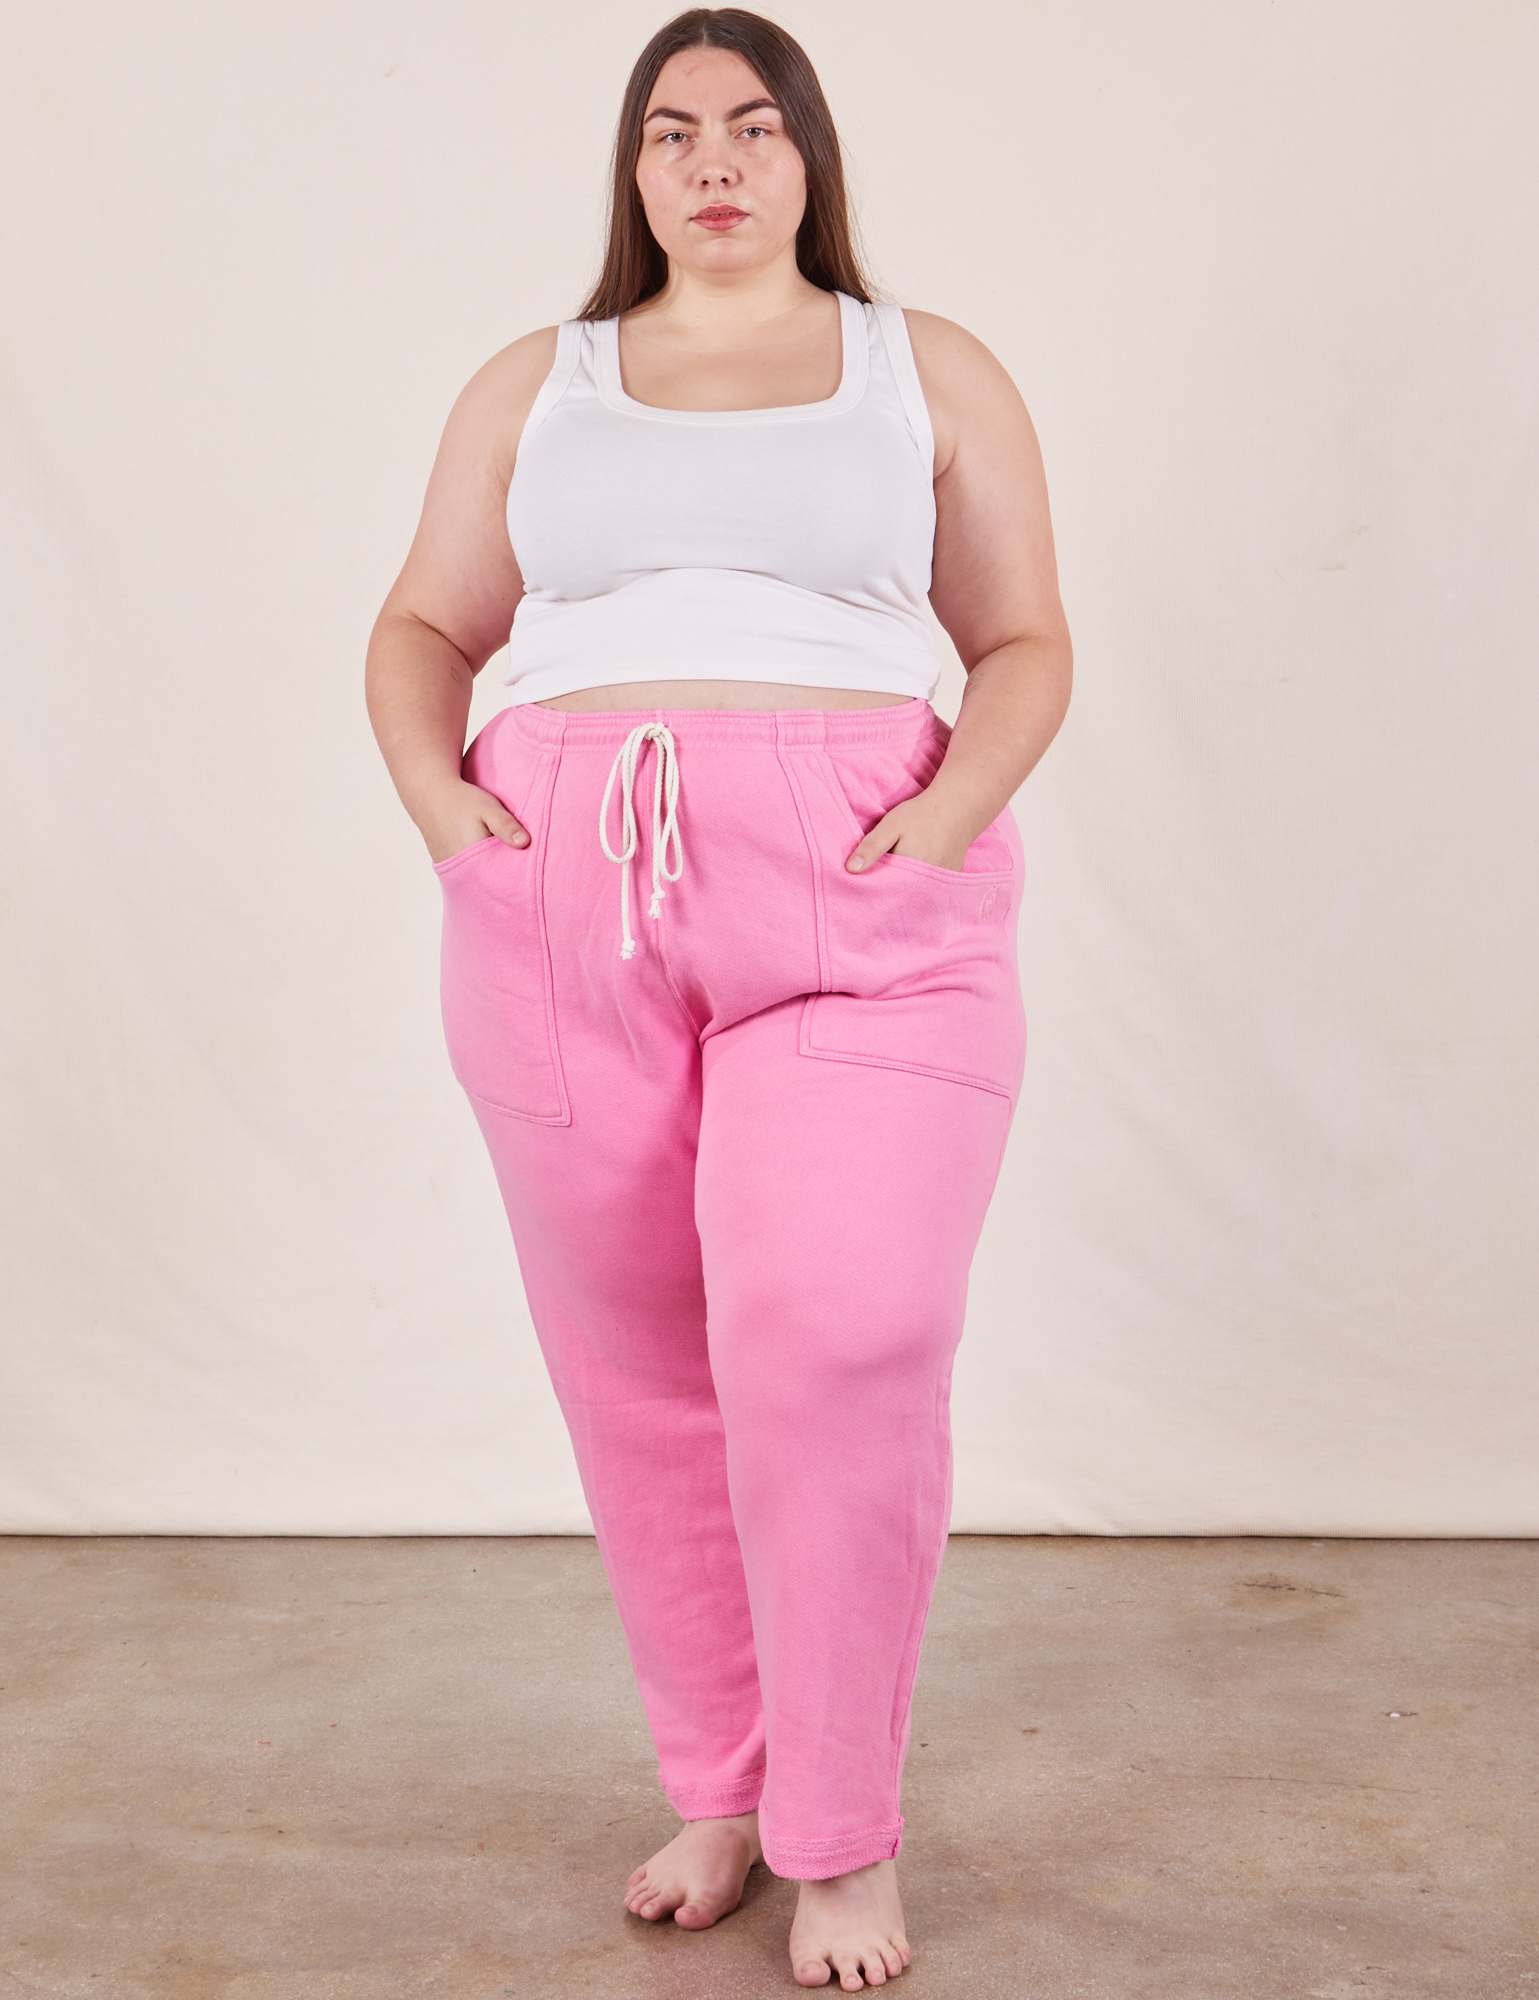 Marielena is 5&#39;8&quot; and wearing 2XL Cropped Rolled Cuff Sweatpants in Bubblegum Pink paired with vintage off-white Cropped Tank Top